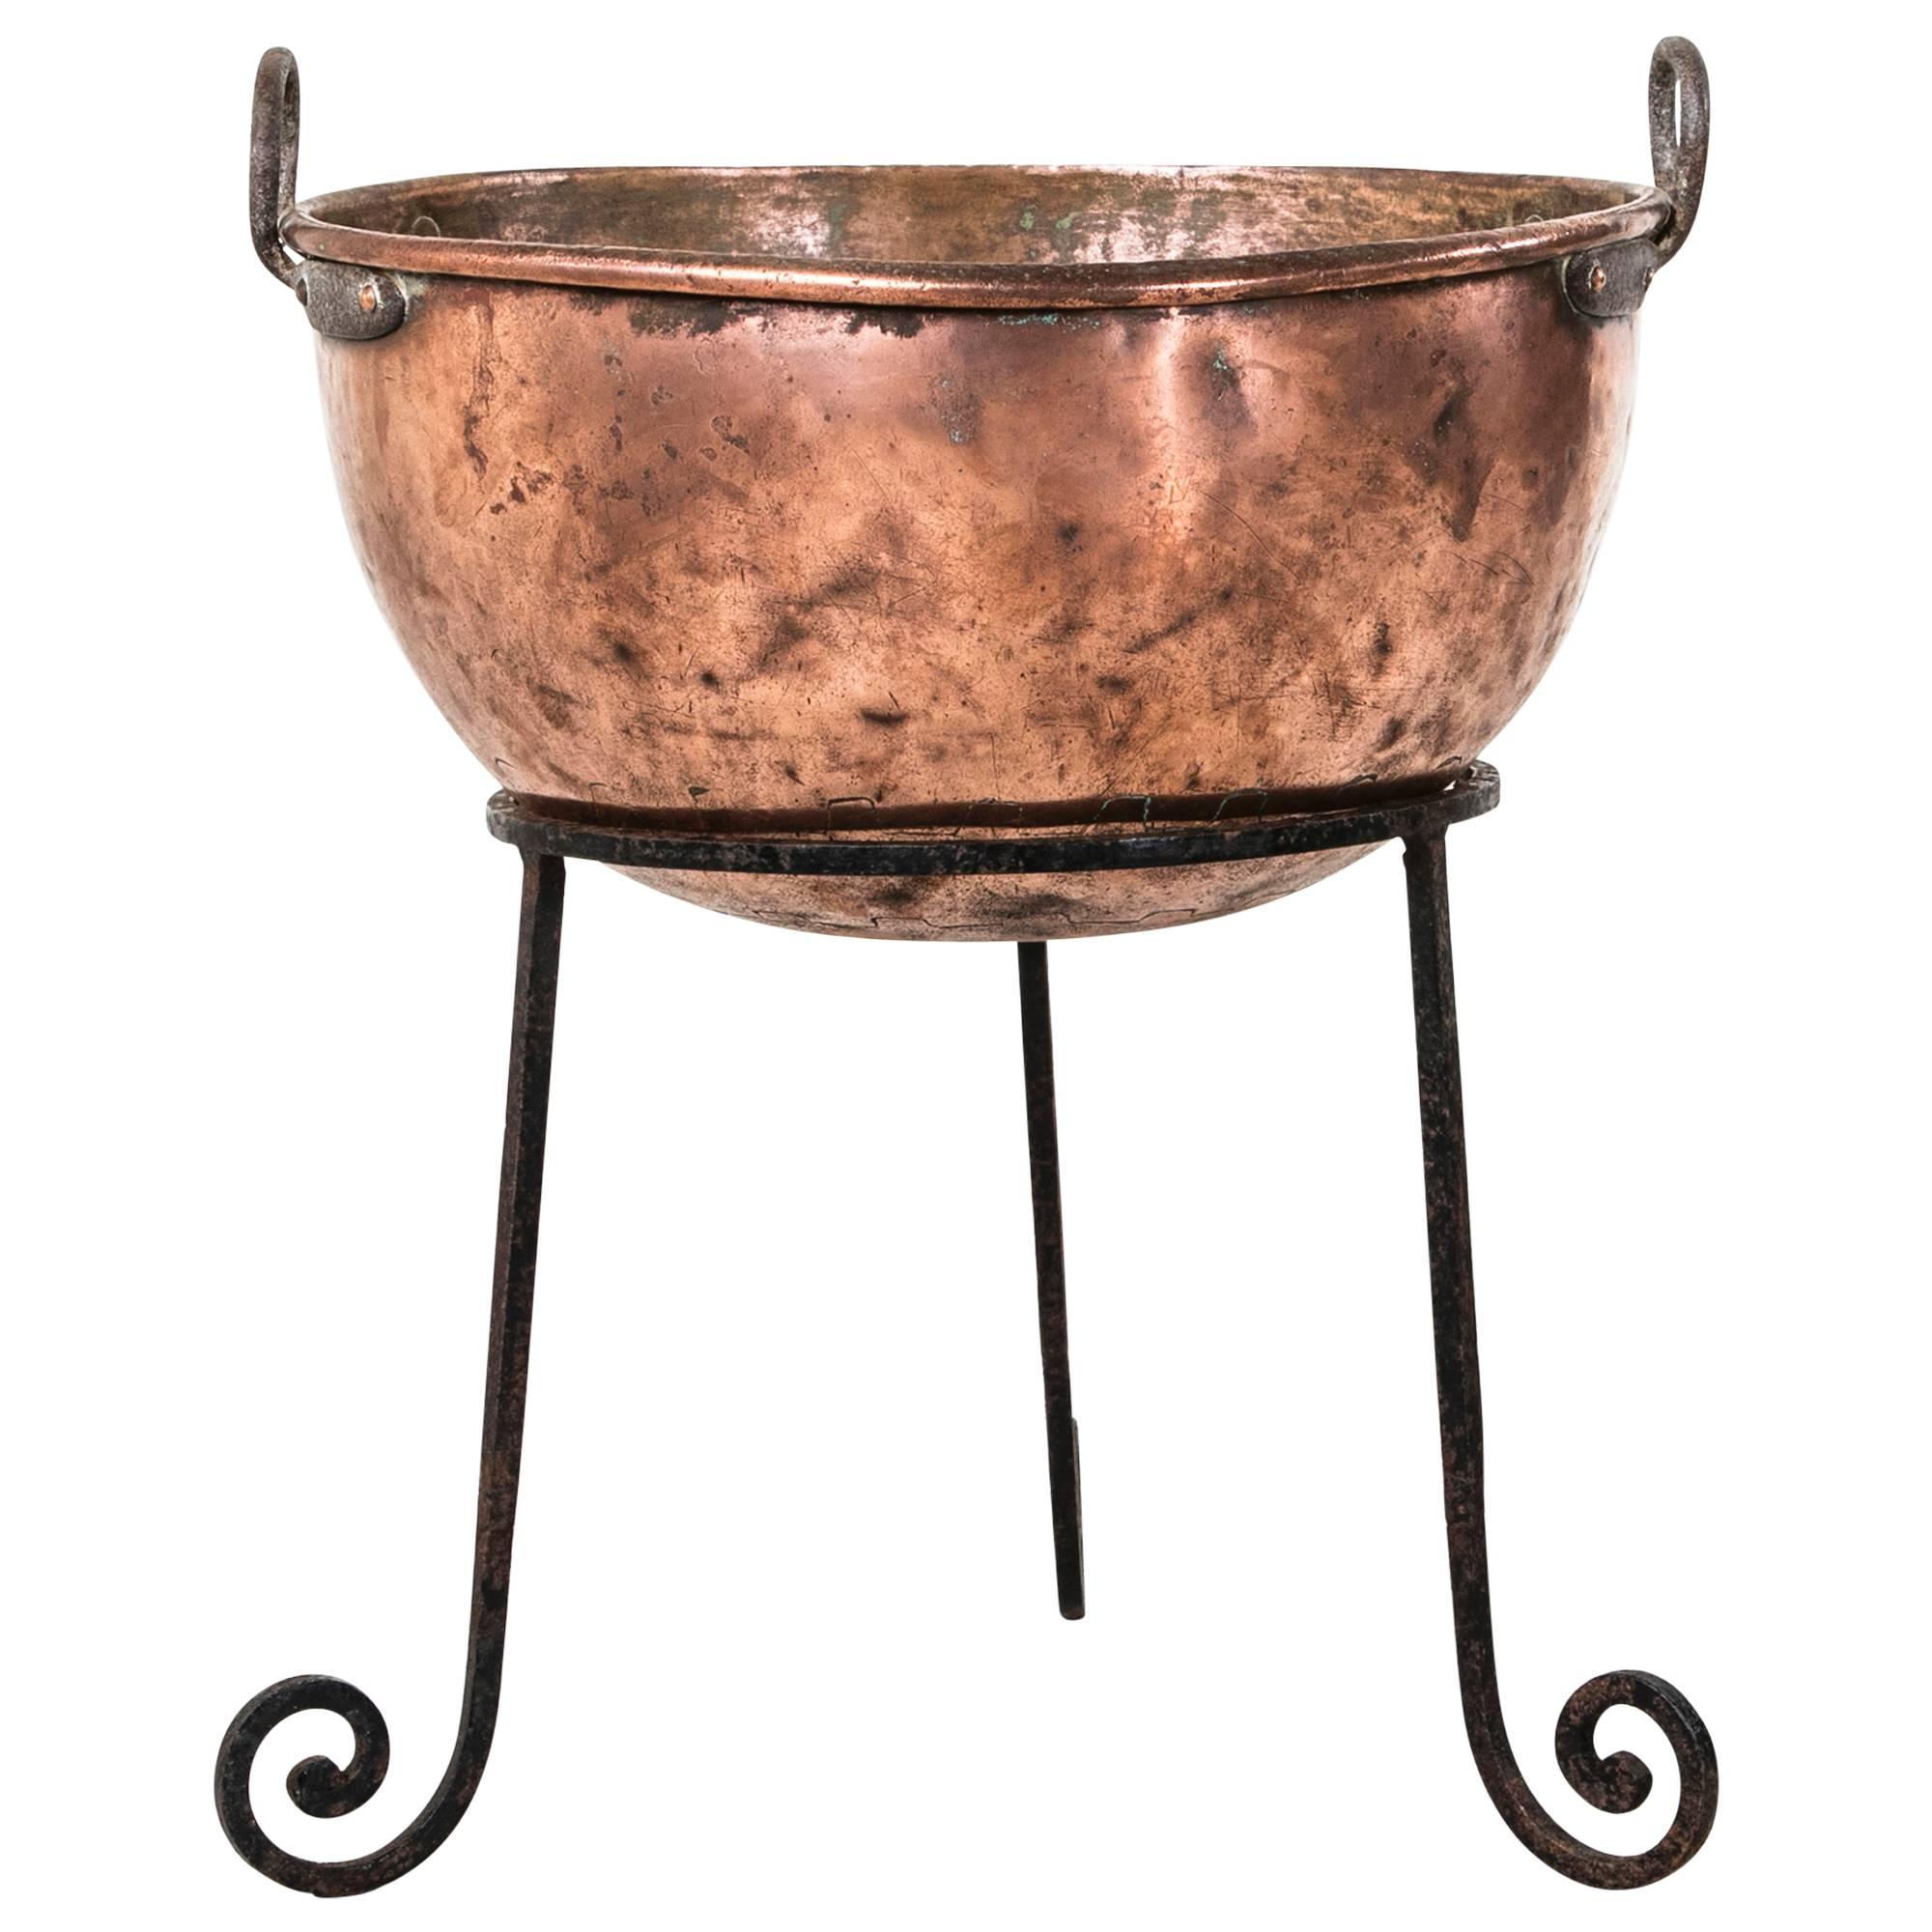 Large 19th Century French Copper Cauldron or Brazier on Iron Stand